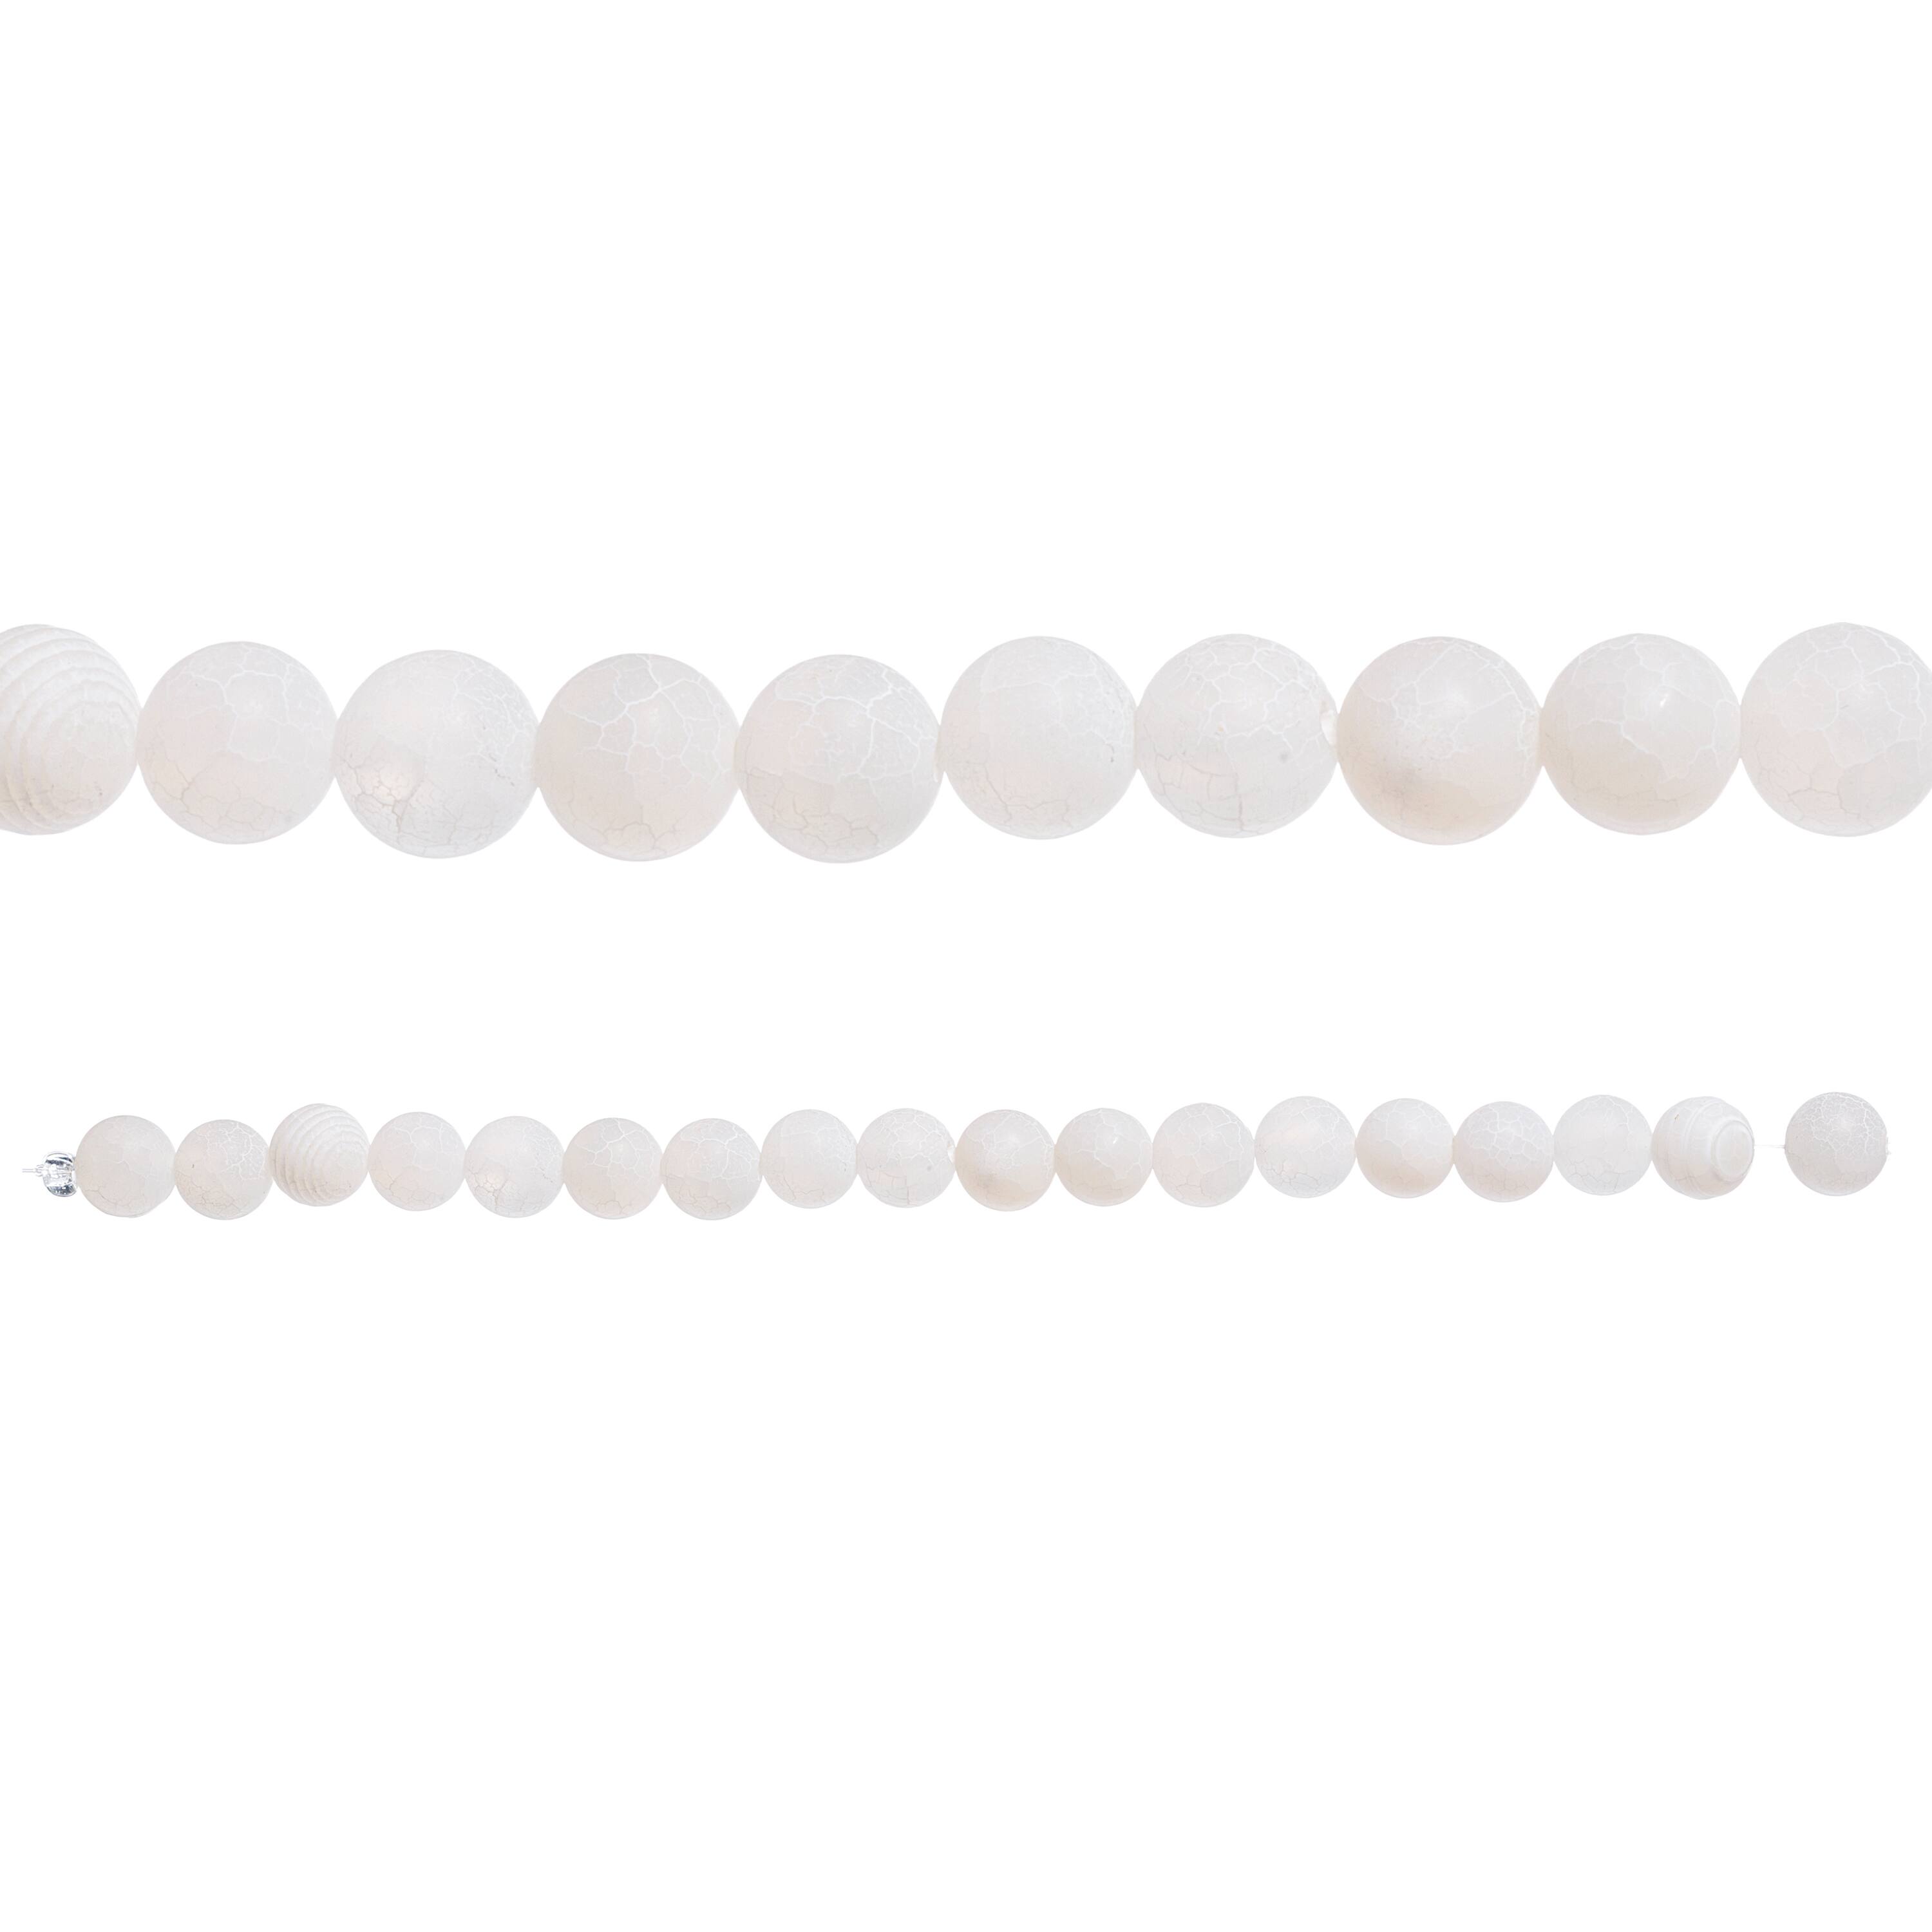 Vedhæftet fil dræbe klodset Matte White Crackle Agate Round Beads, 10mm by Bead Landing™ | Michaels